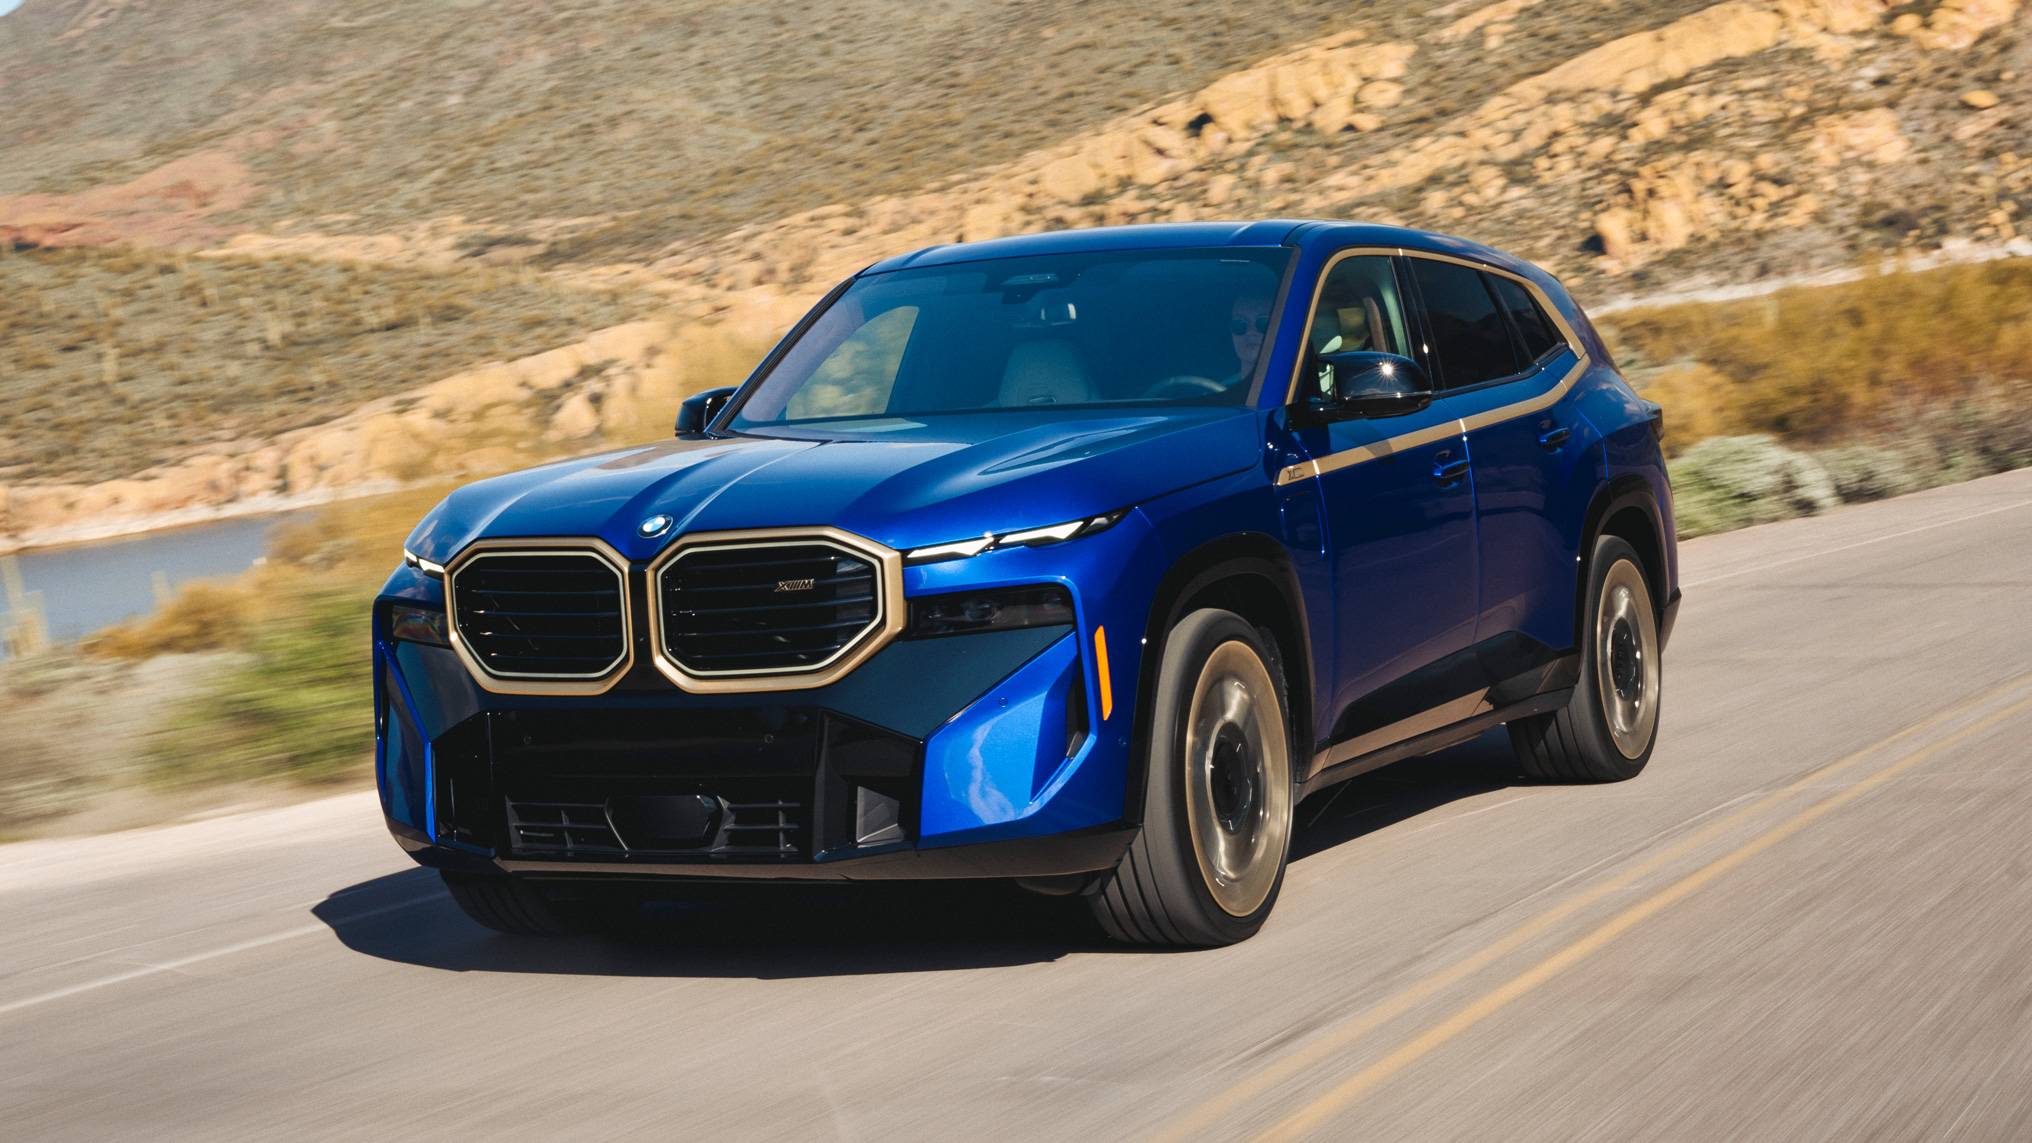 The BMW XM in blue on an open road.